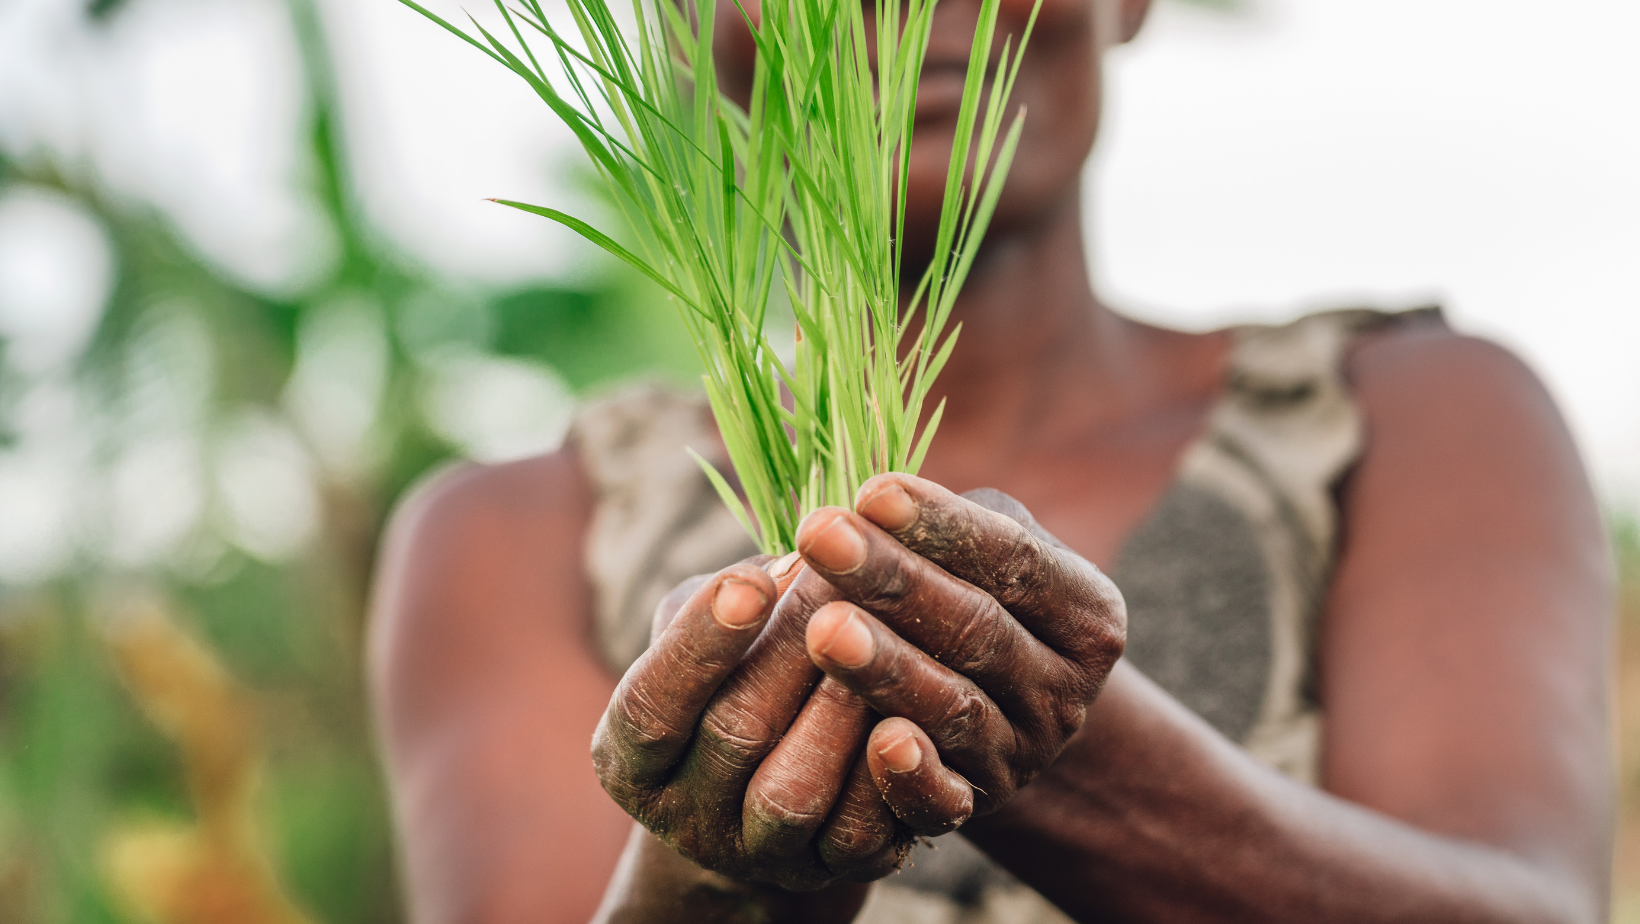 Agnes Kalibata - Food, Agriculture and Human Flourishing - Stories Of Impact Podcast